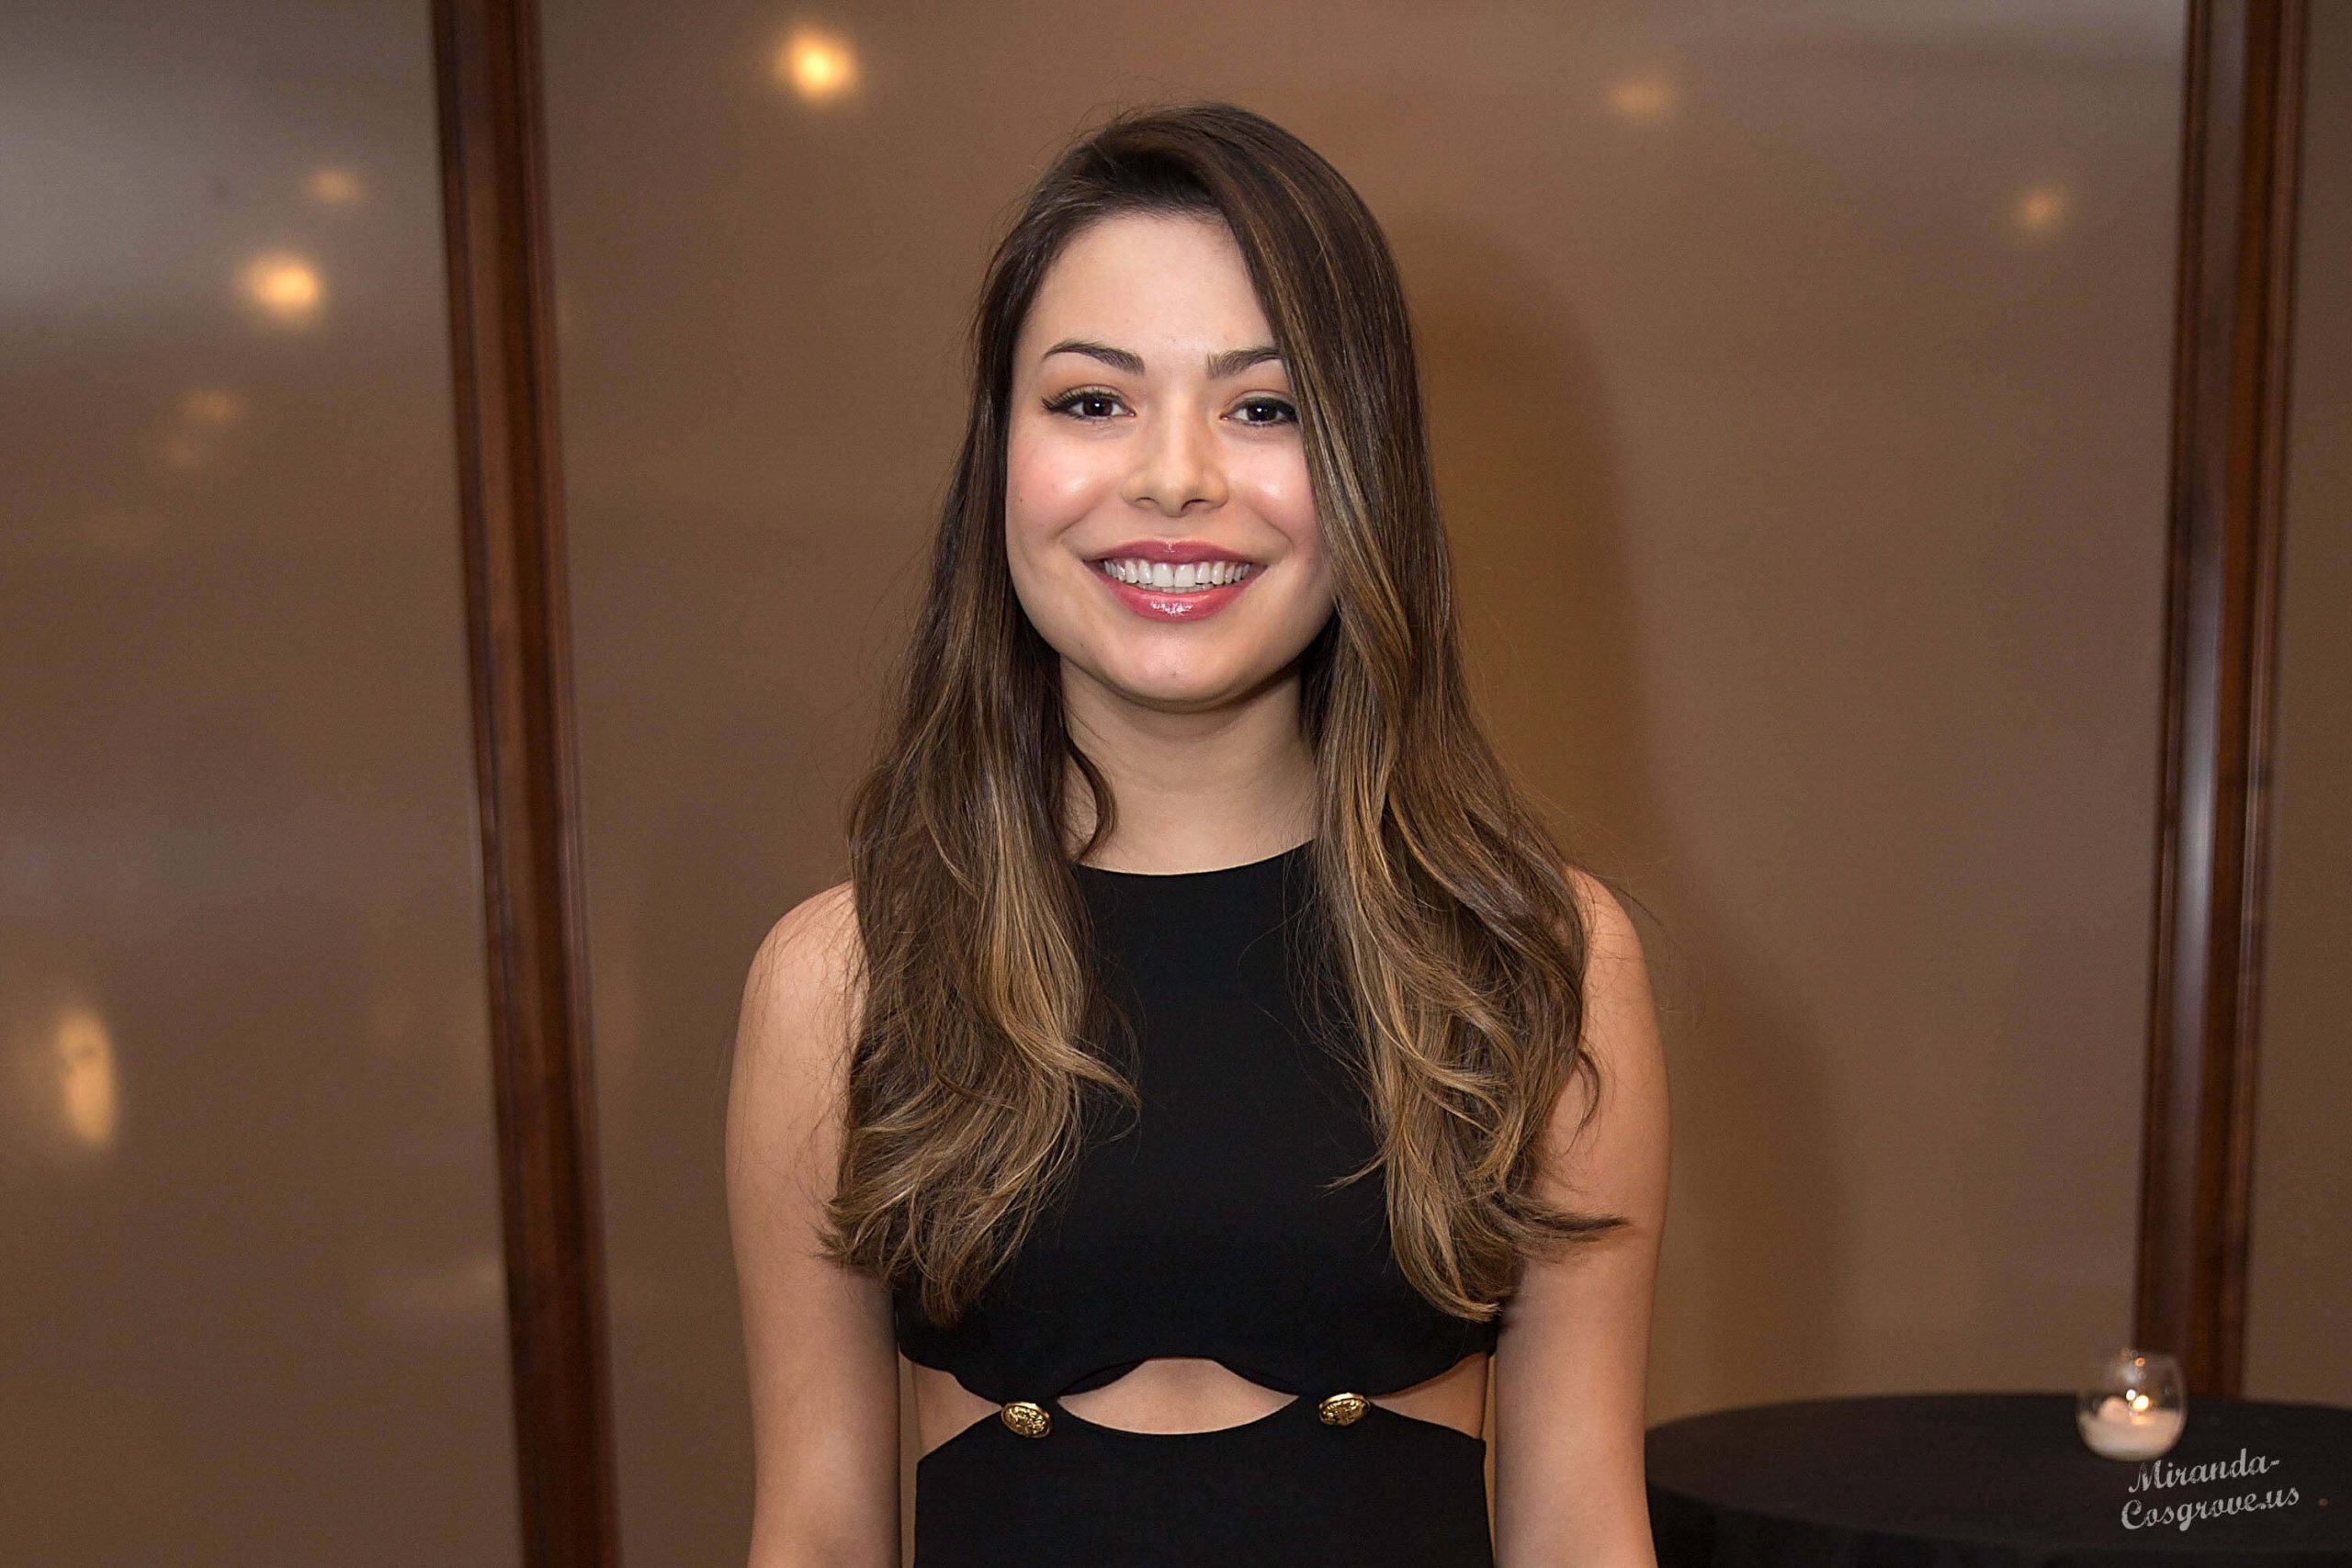 49 Miranda Cosgrove Nude Pictures Which Are Sure To Keep You Charmed With Her Charisma 65